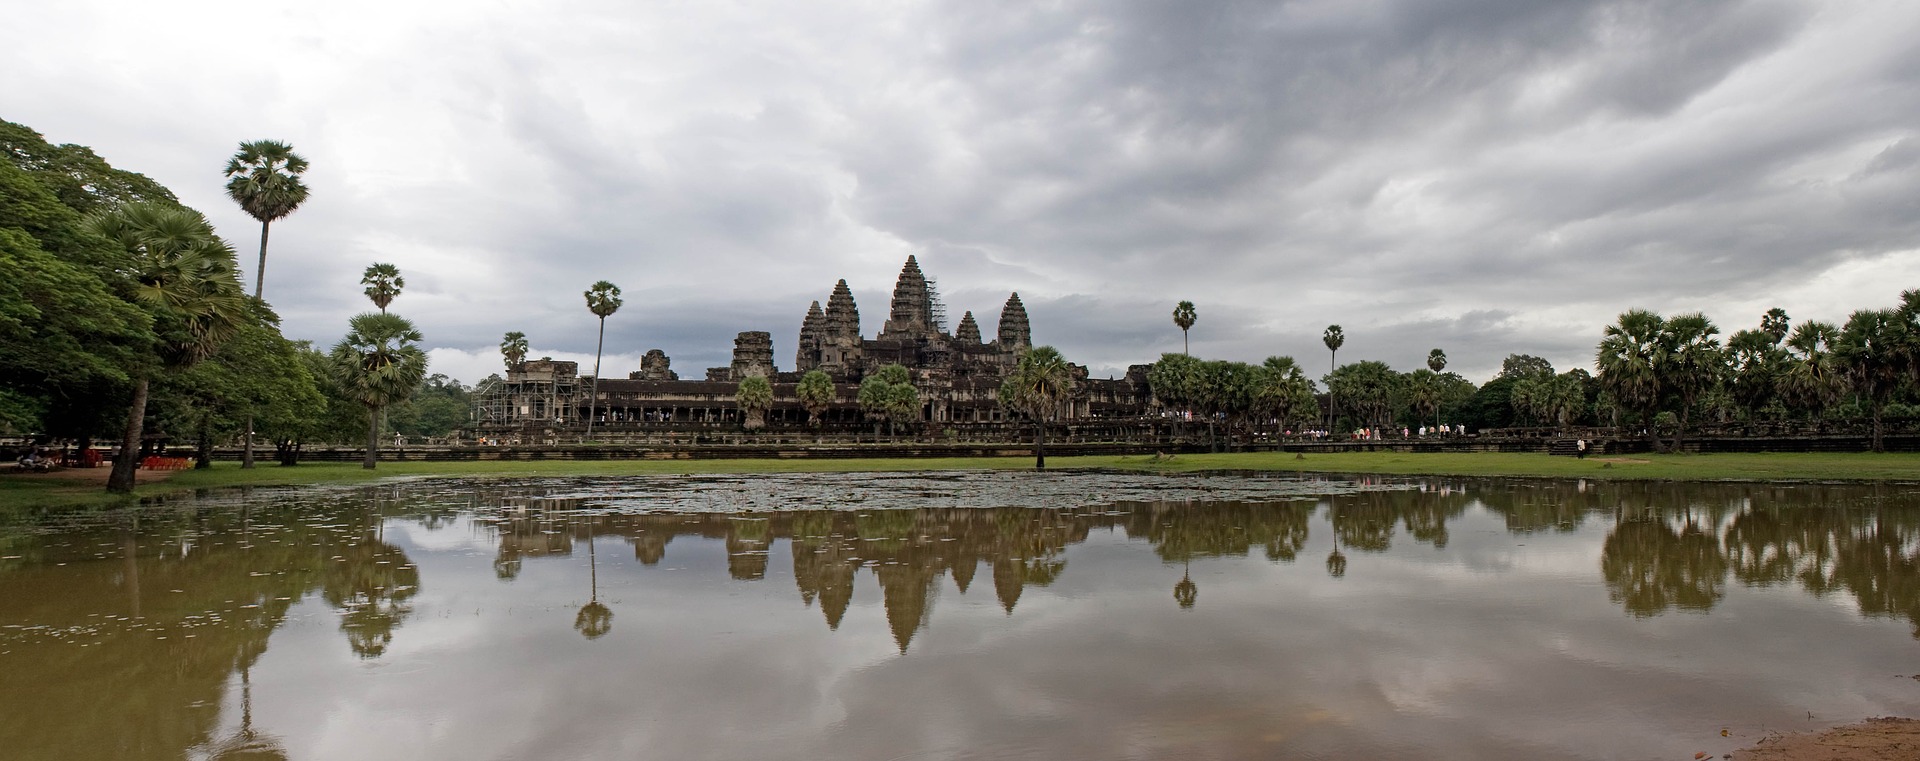 Angkor Wat from a distance reflected on the water